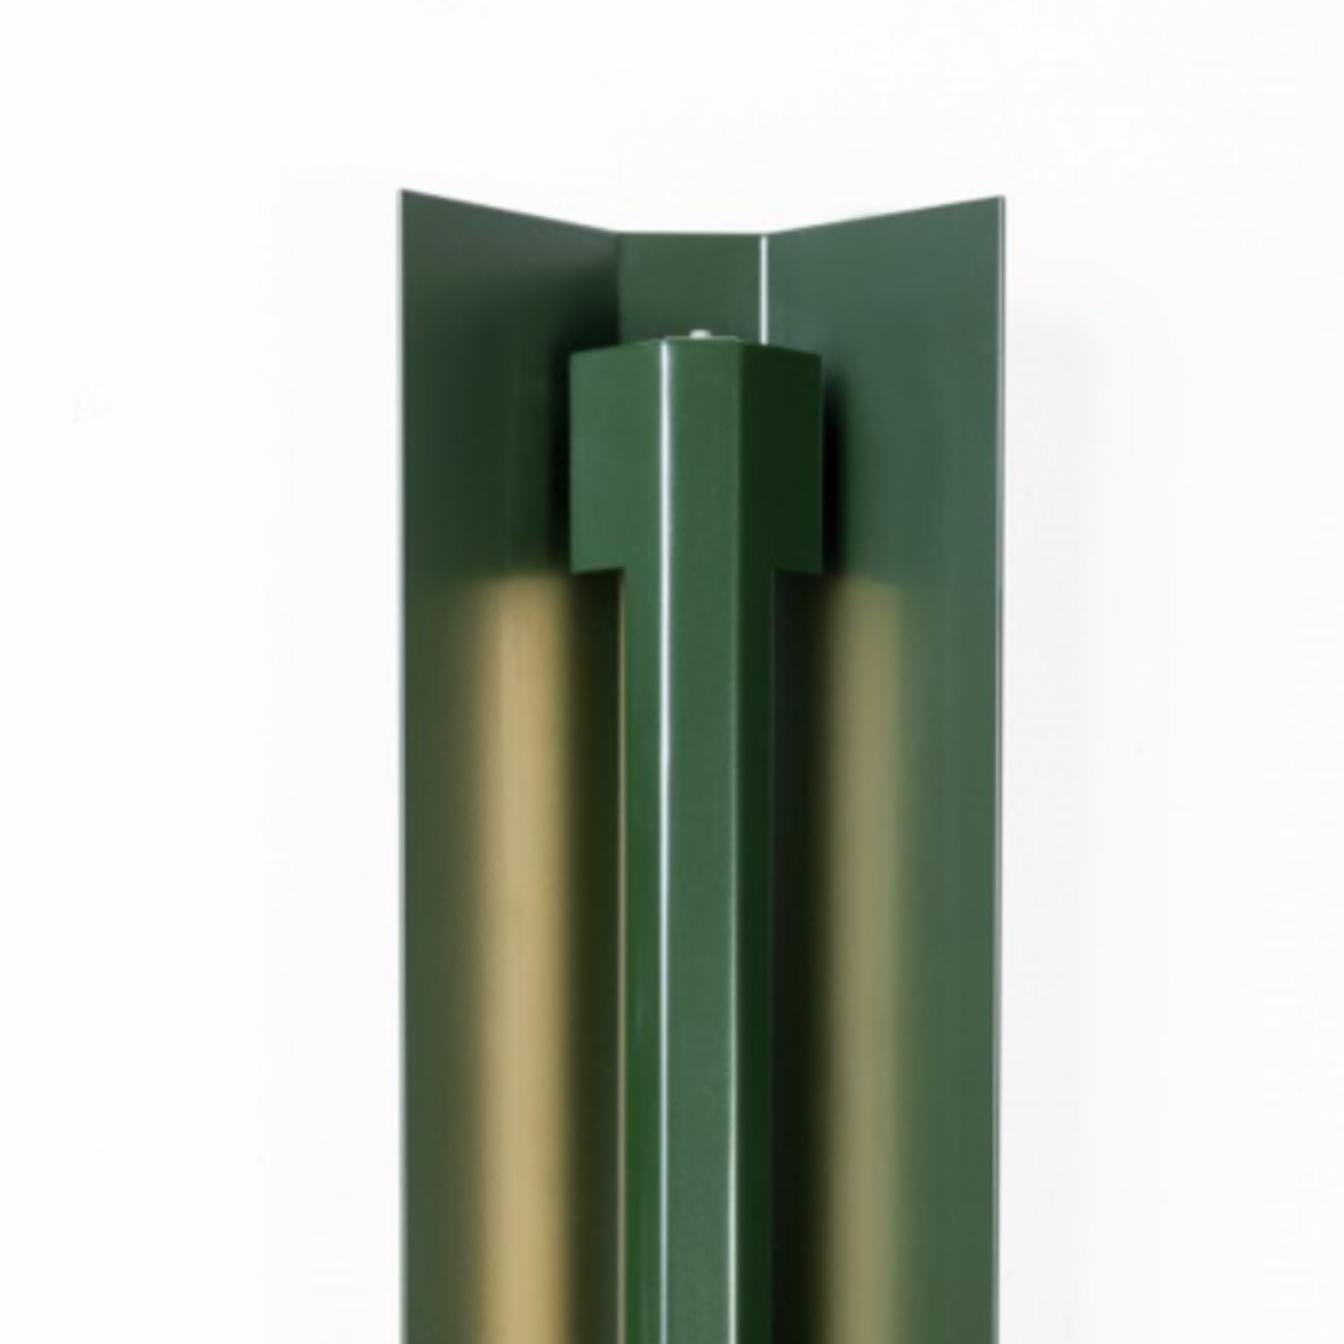 Medium Misalliance Ral bottle green wall light by Lexavala
Dimensions: D 16 x W 100 x H 8 cm
Materials: powder coated aluminium.

There are two lenghts of socket covers, extending over the LED. Two short are to be found in Suspended and Surface,